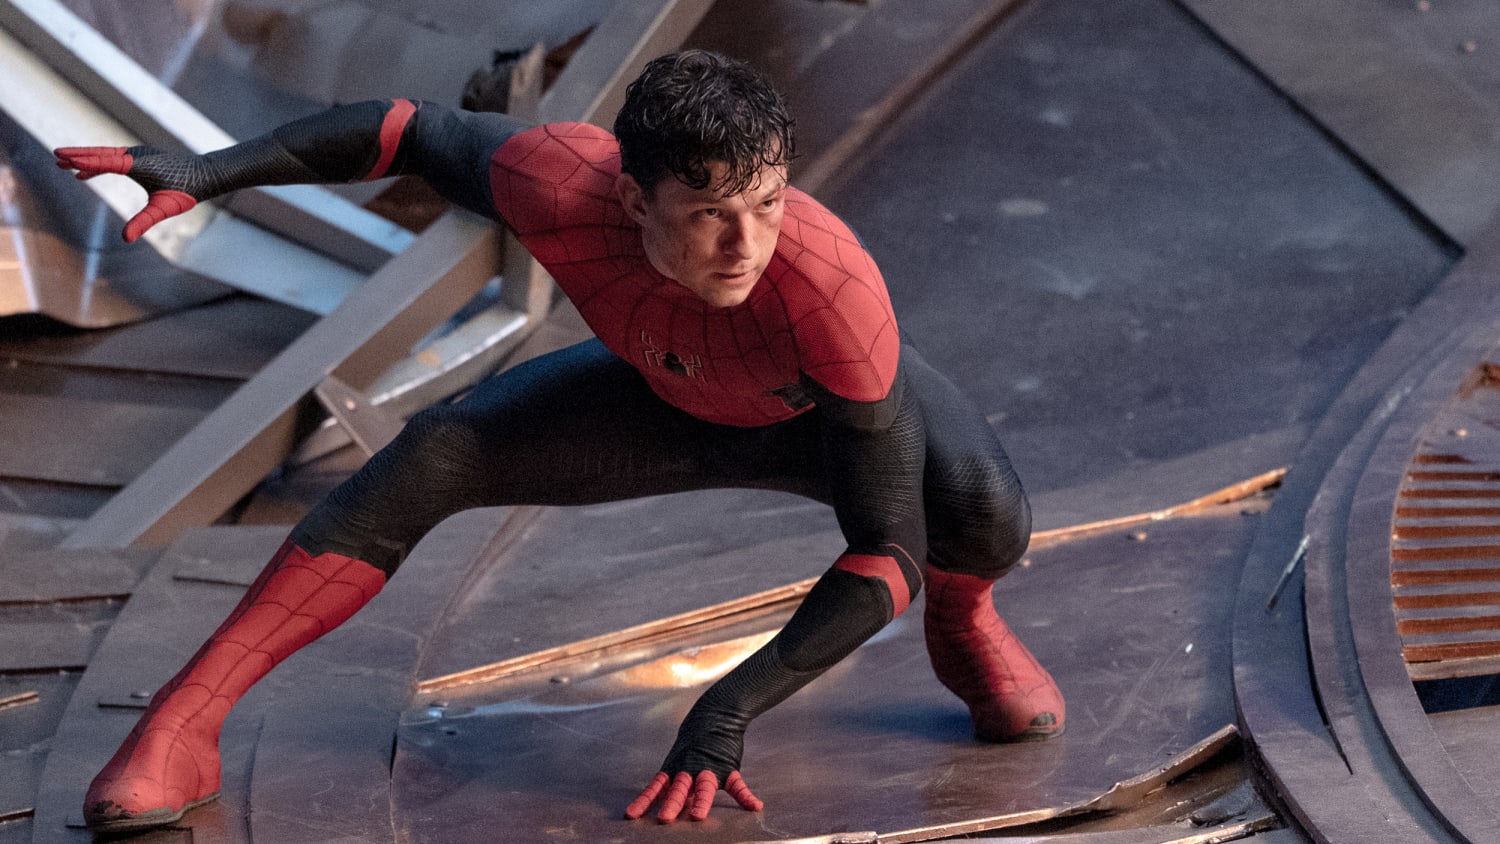 New movie 'Spider-Man: No Way Home' from Marvel and Sony is feel-good fun